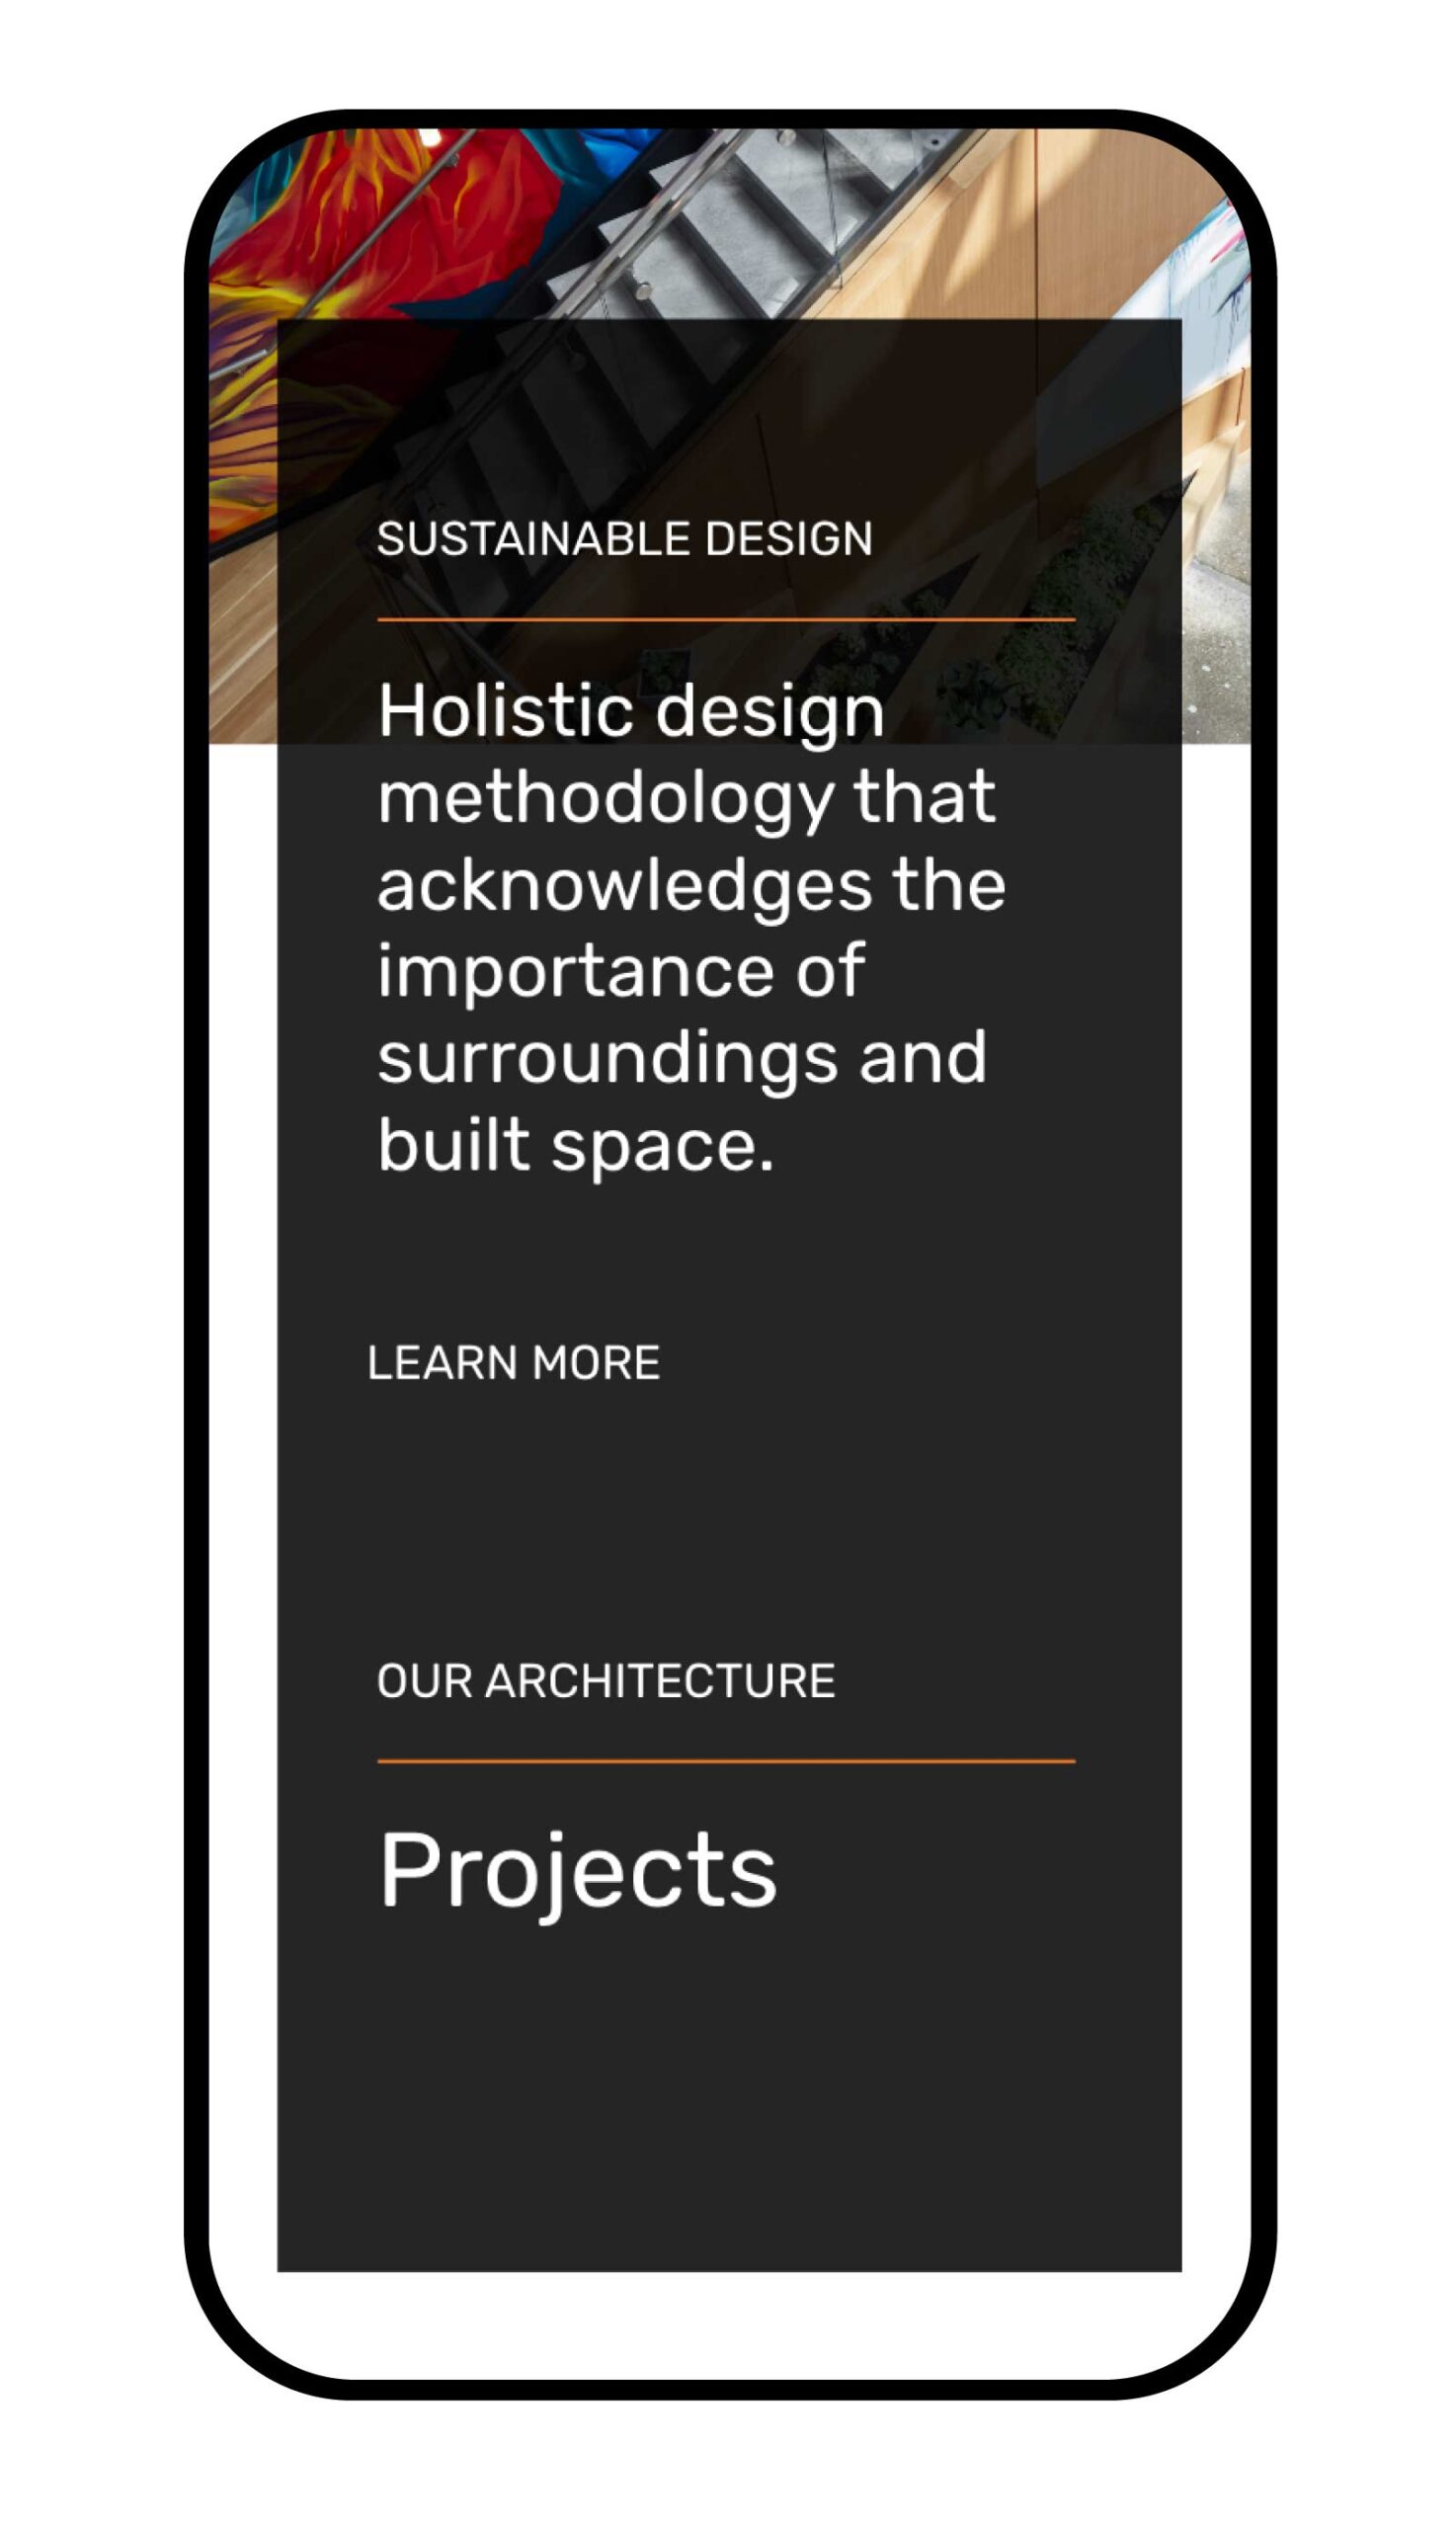 UI UX Architecture company website holistic design and projects.